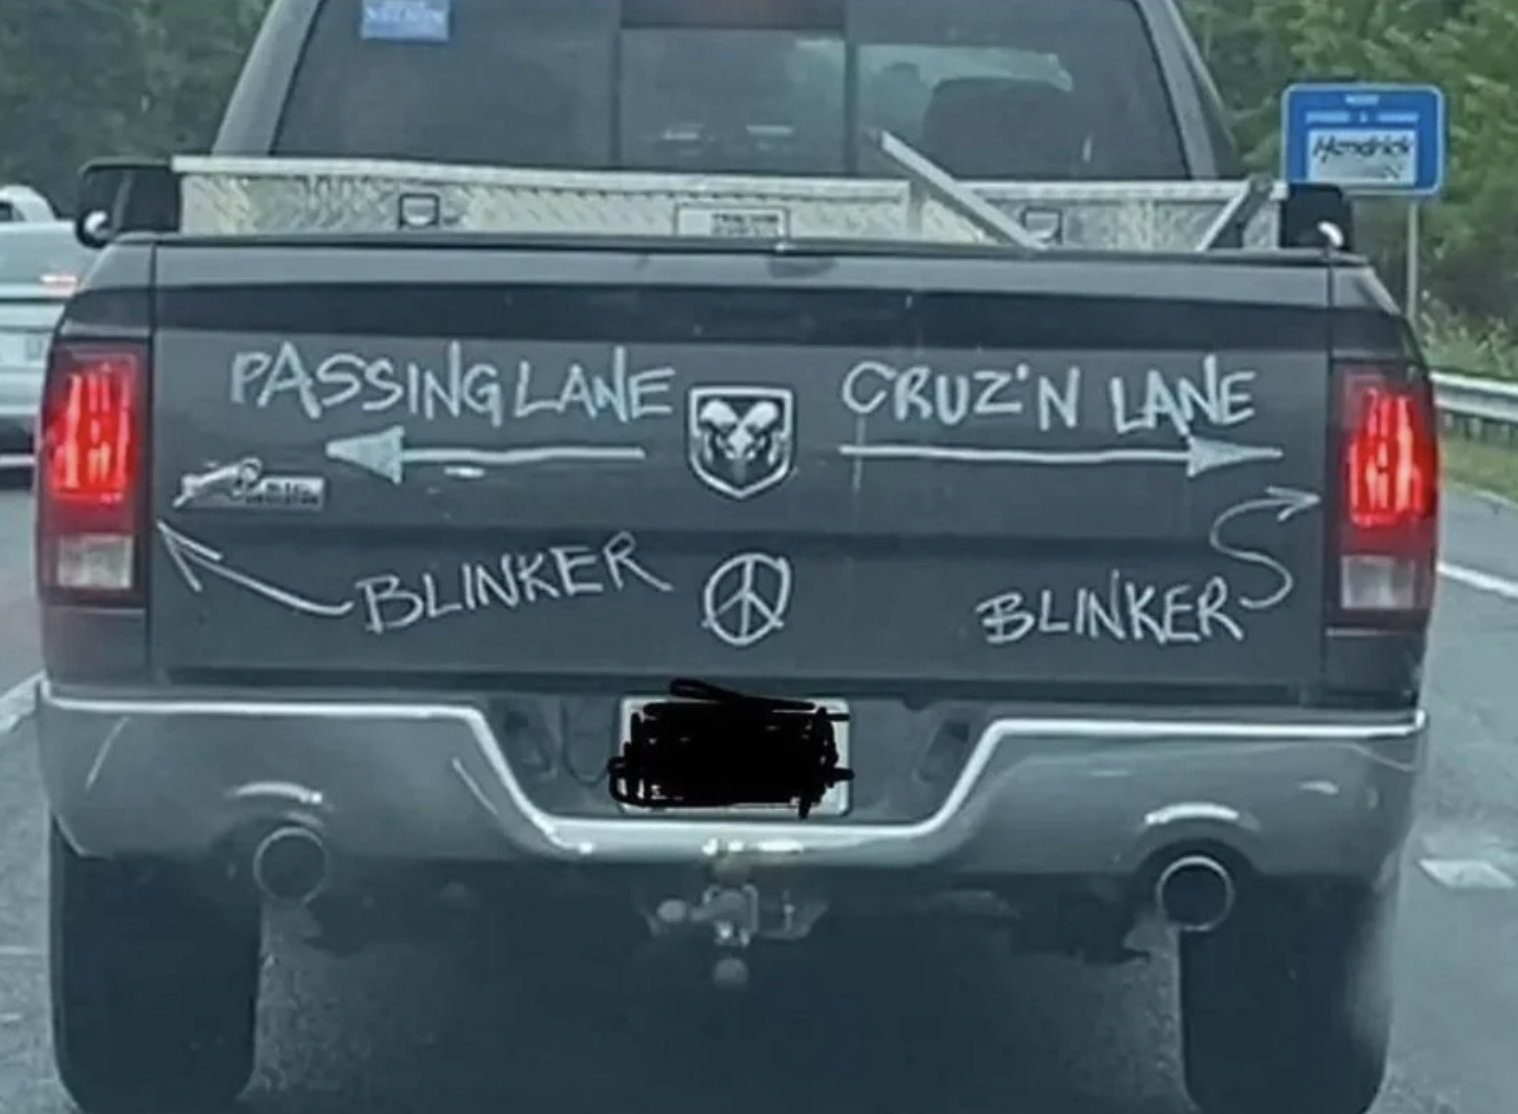 back of a truck has insructions for driving, an arrow points left for the passing lane and an arrow pointing right for the cruising lane, also with arrows to the blinkers